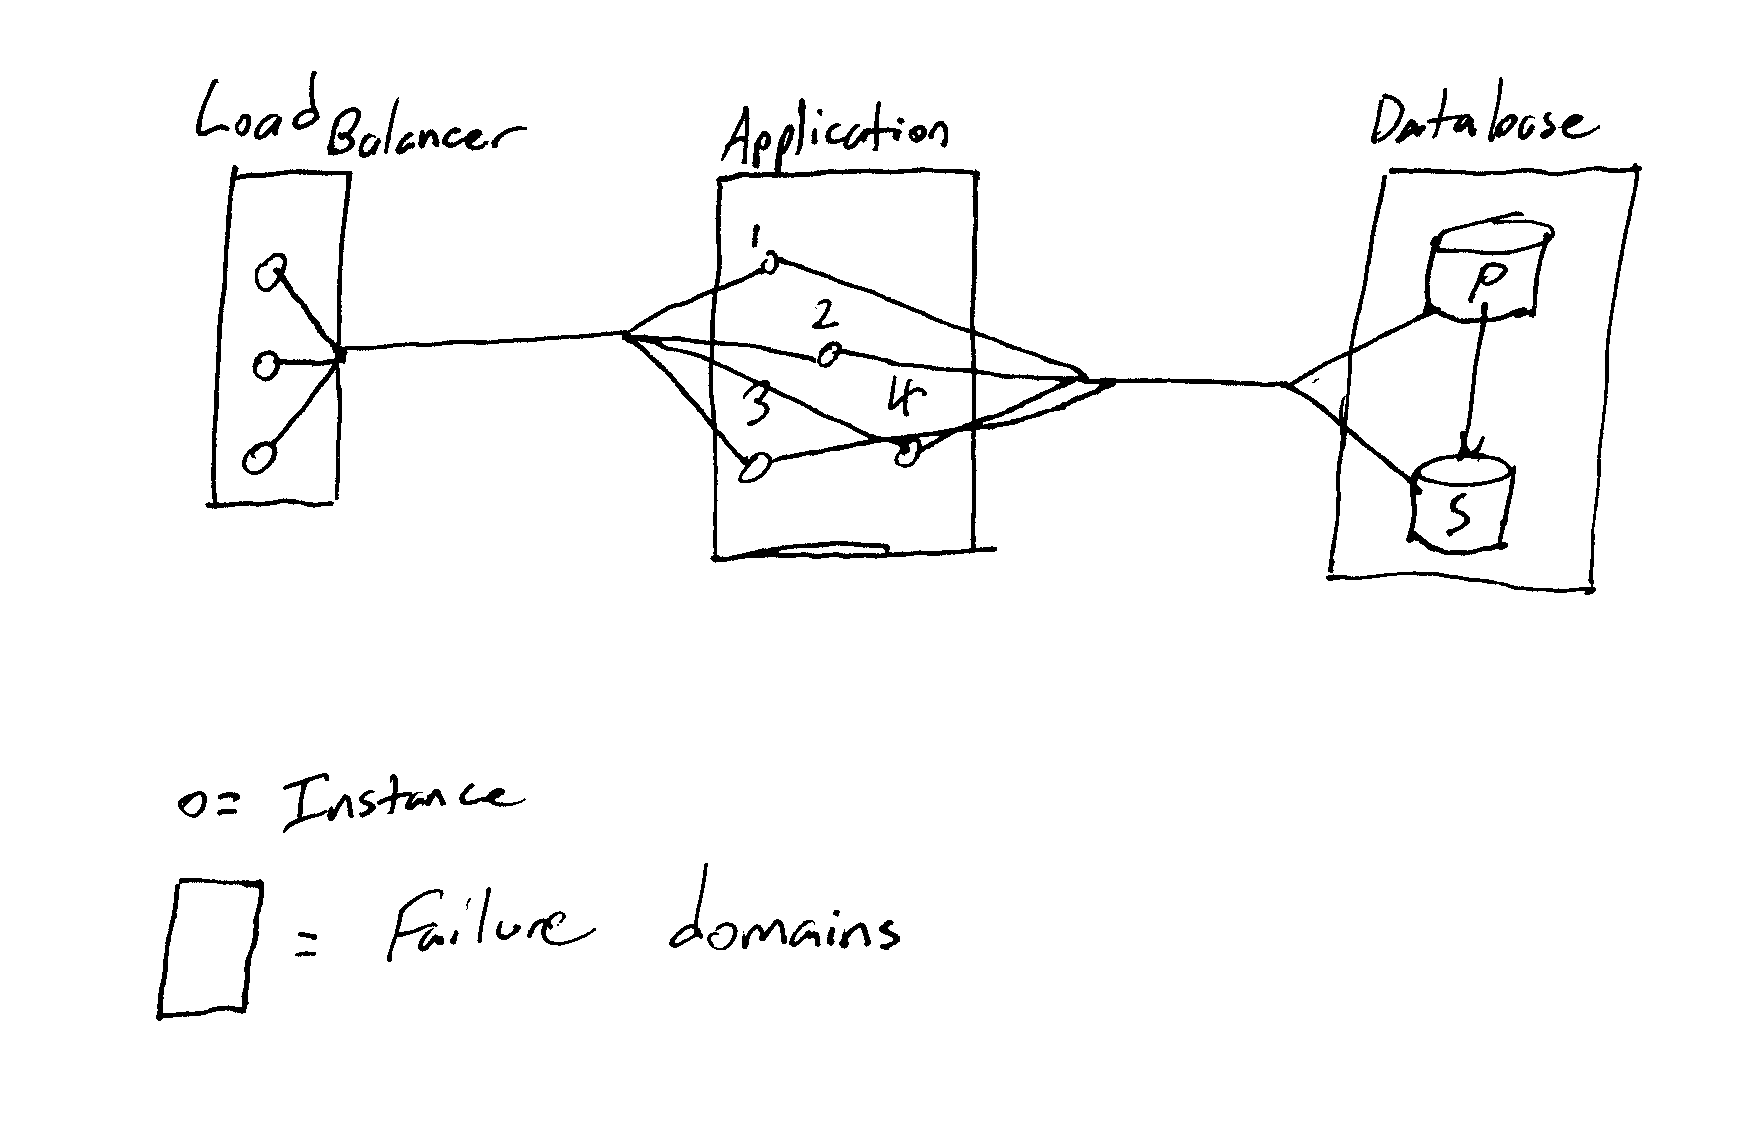 A somewhat typical applicationarchitecture